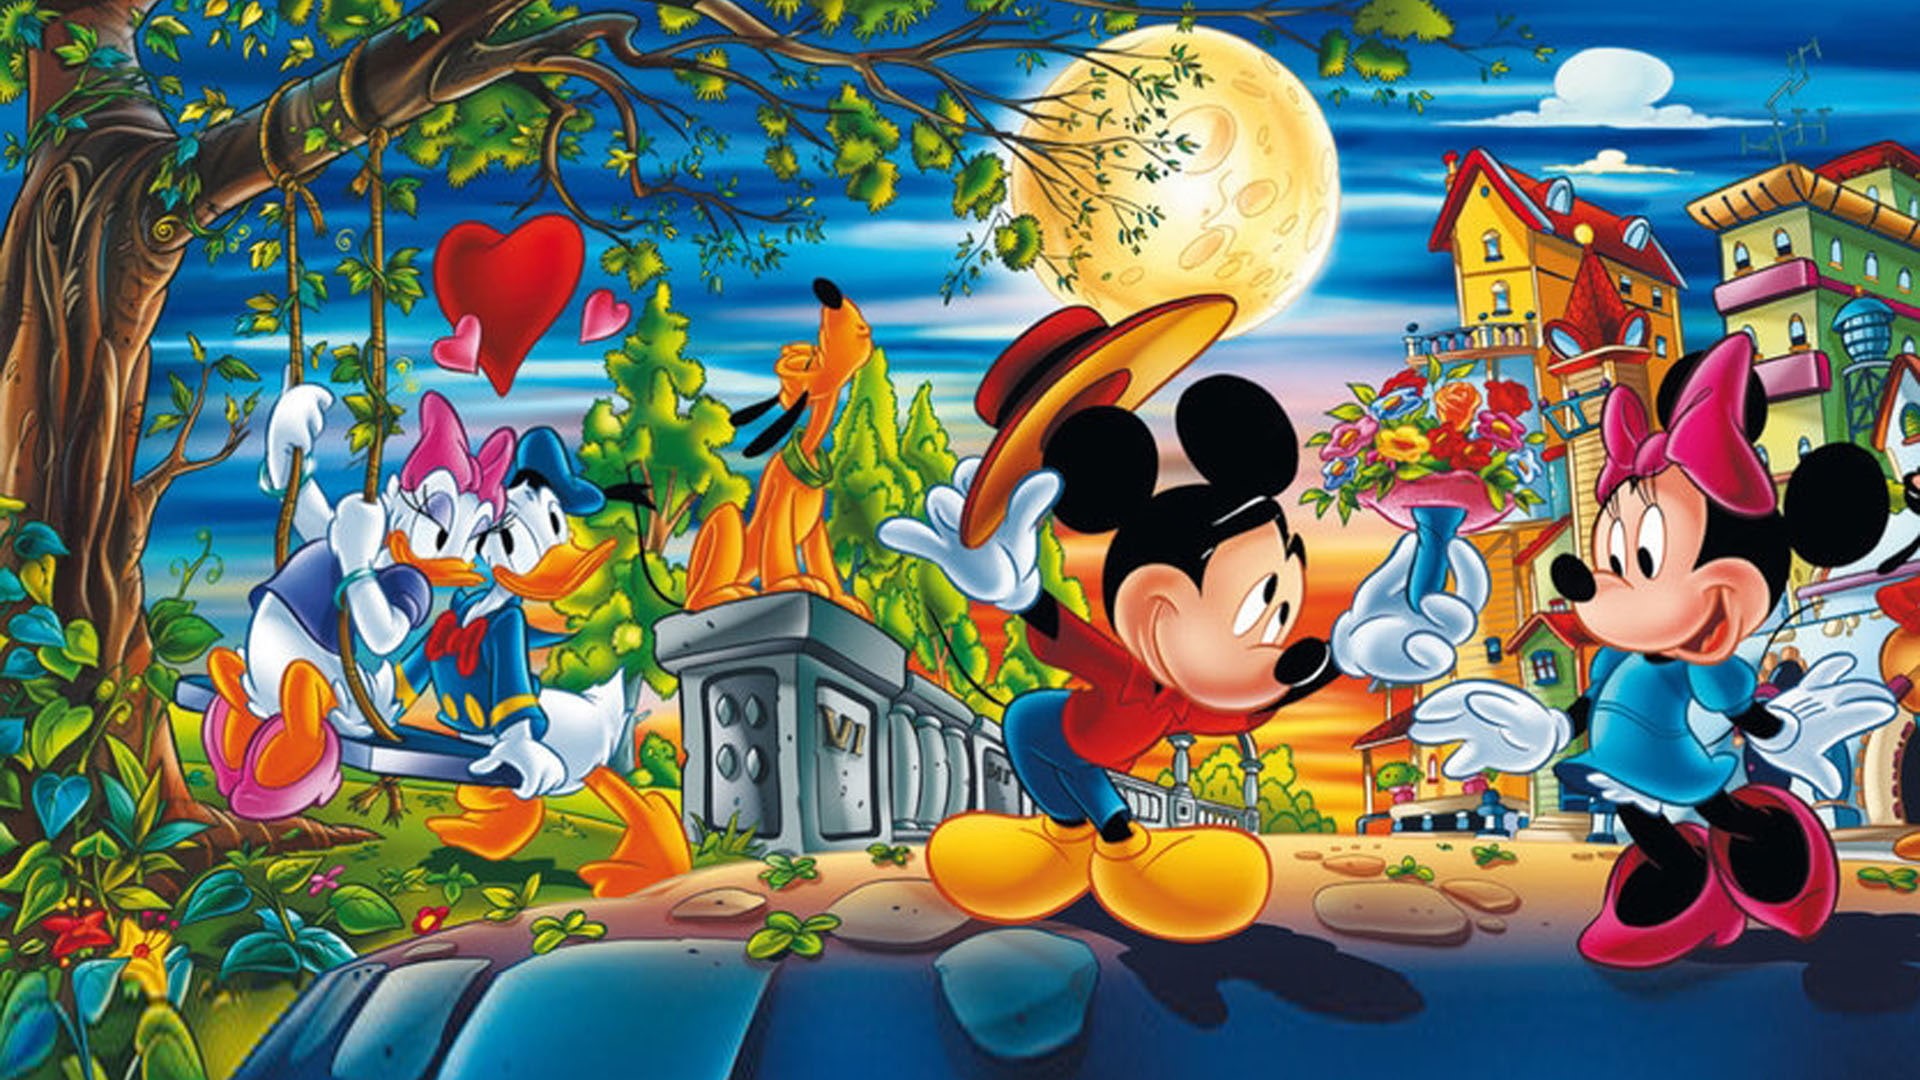 Wallpaper / disney, day, wallpaper, duck, mickey, 1080P, donald, cartoons, hd, daisy, couple, picture, valentine, love, mouse, minnie free download